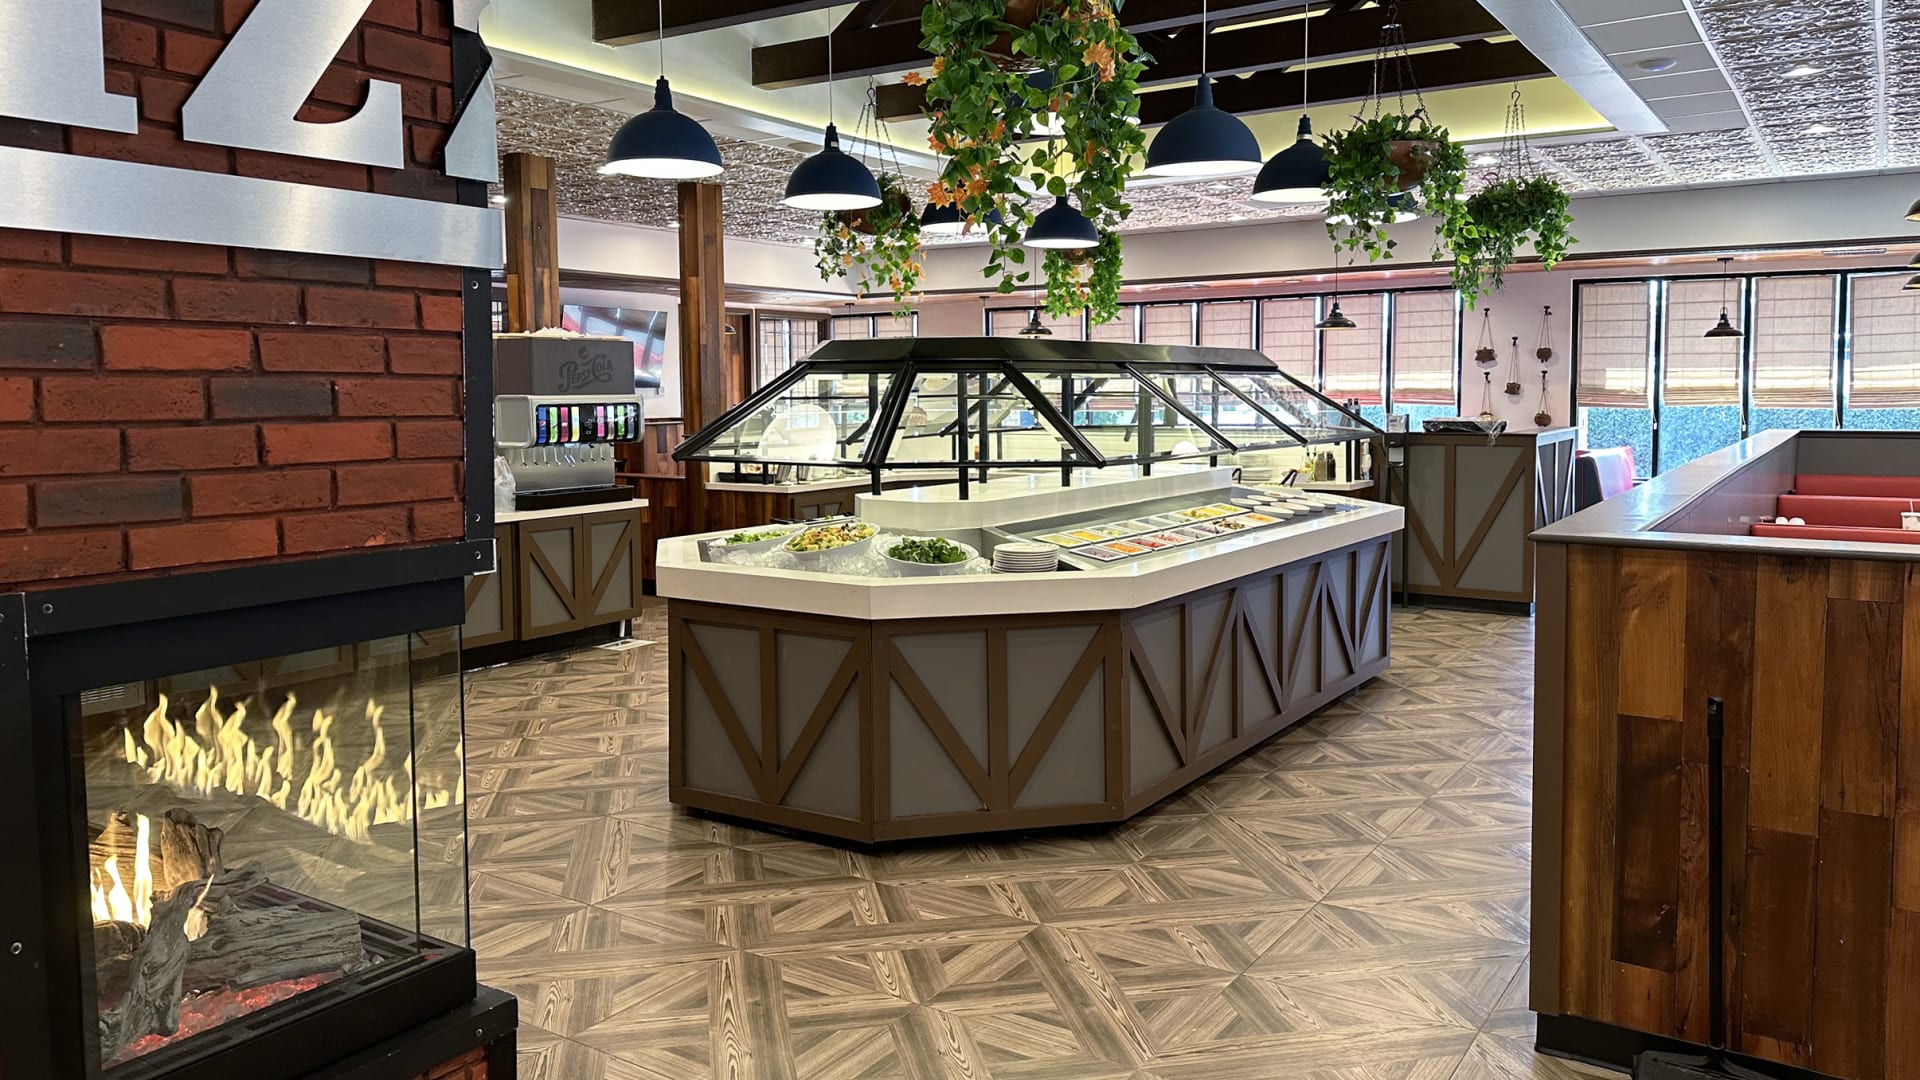 Sizzler gets a redesign, but keeps the salad bar